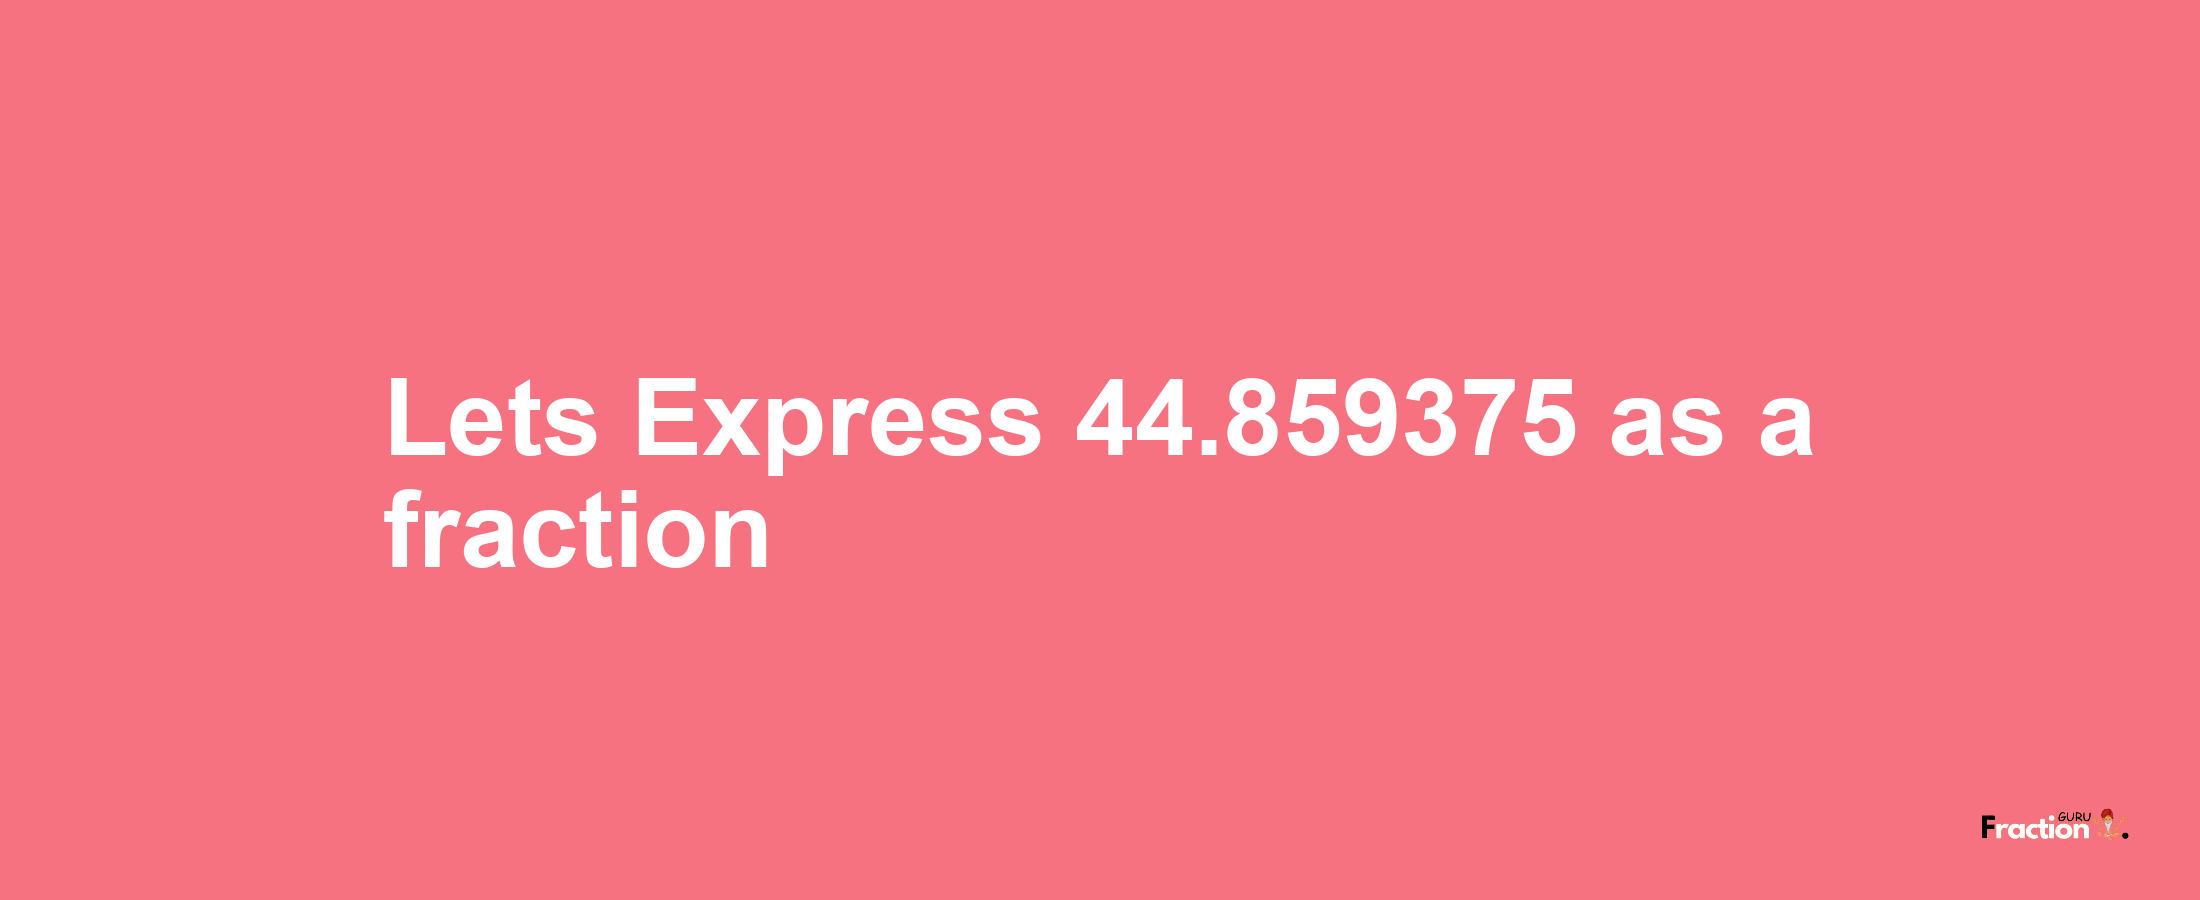 Lets Express 44.859375 as afraction